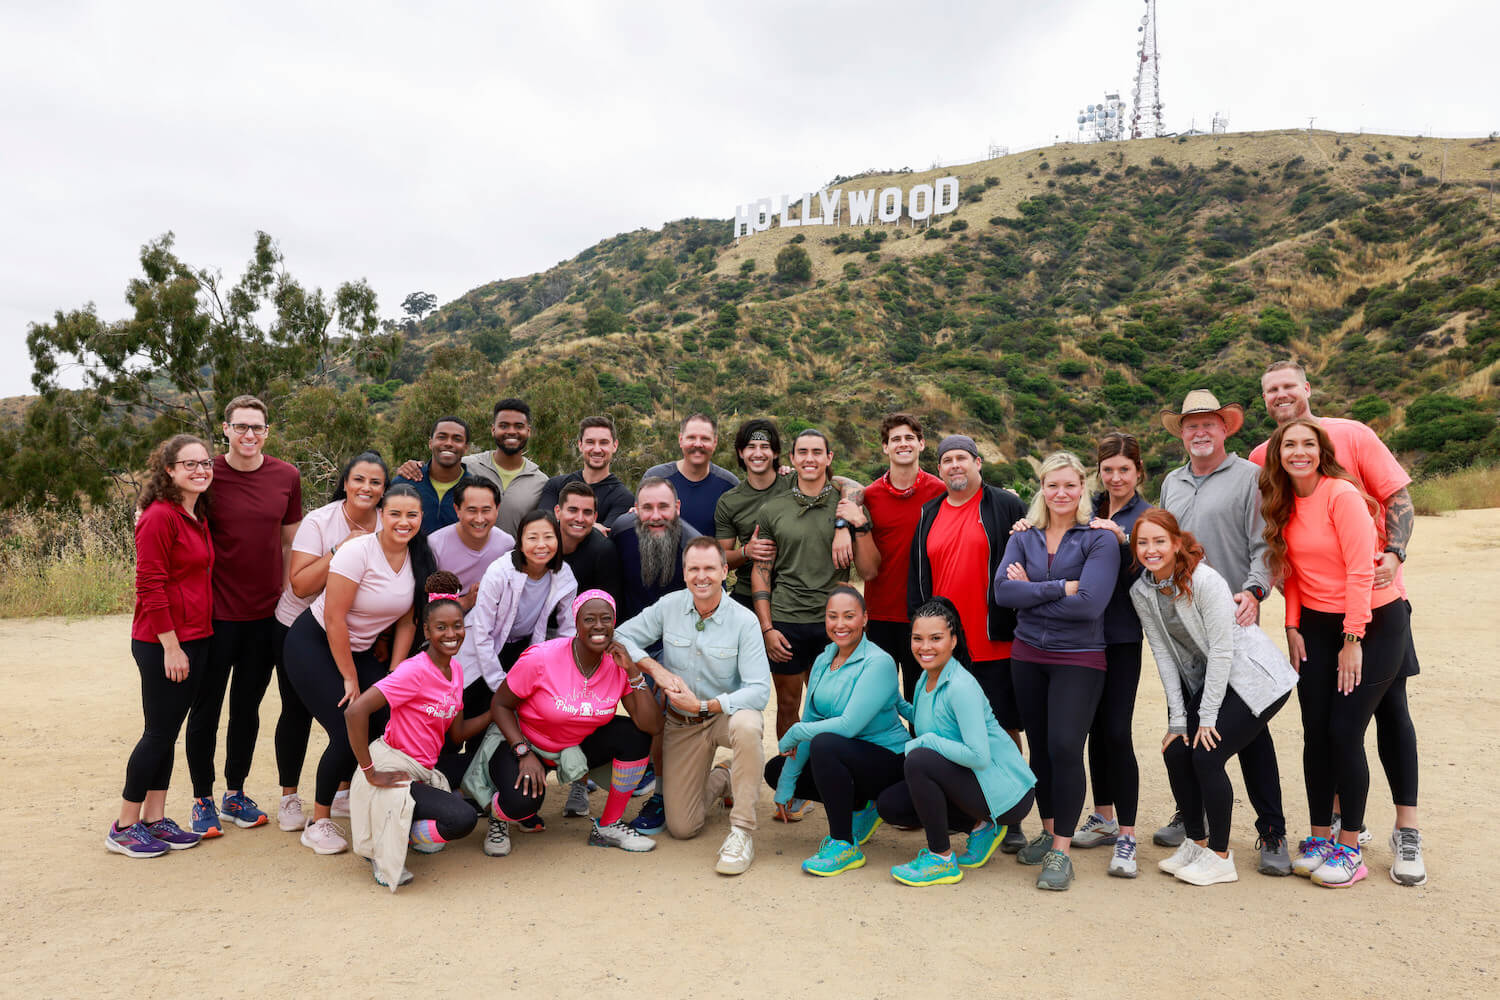 'The Amazing Race' Season 35 cast standing together and smiling